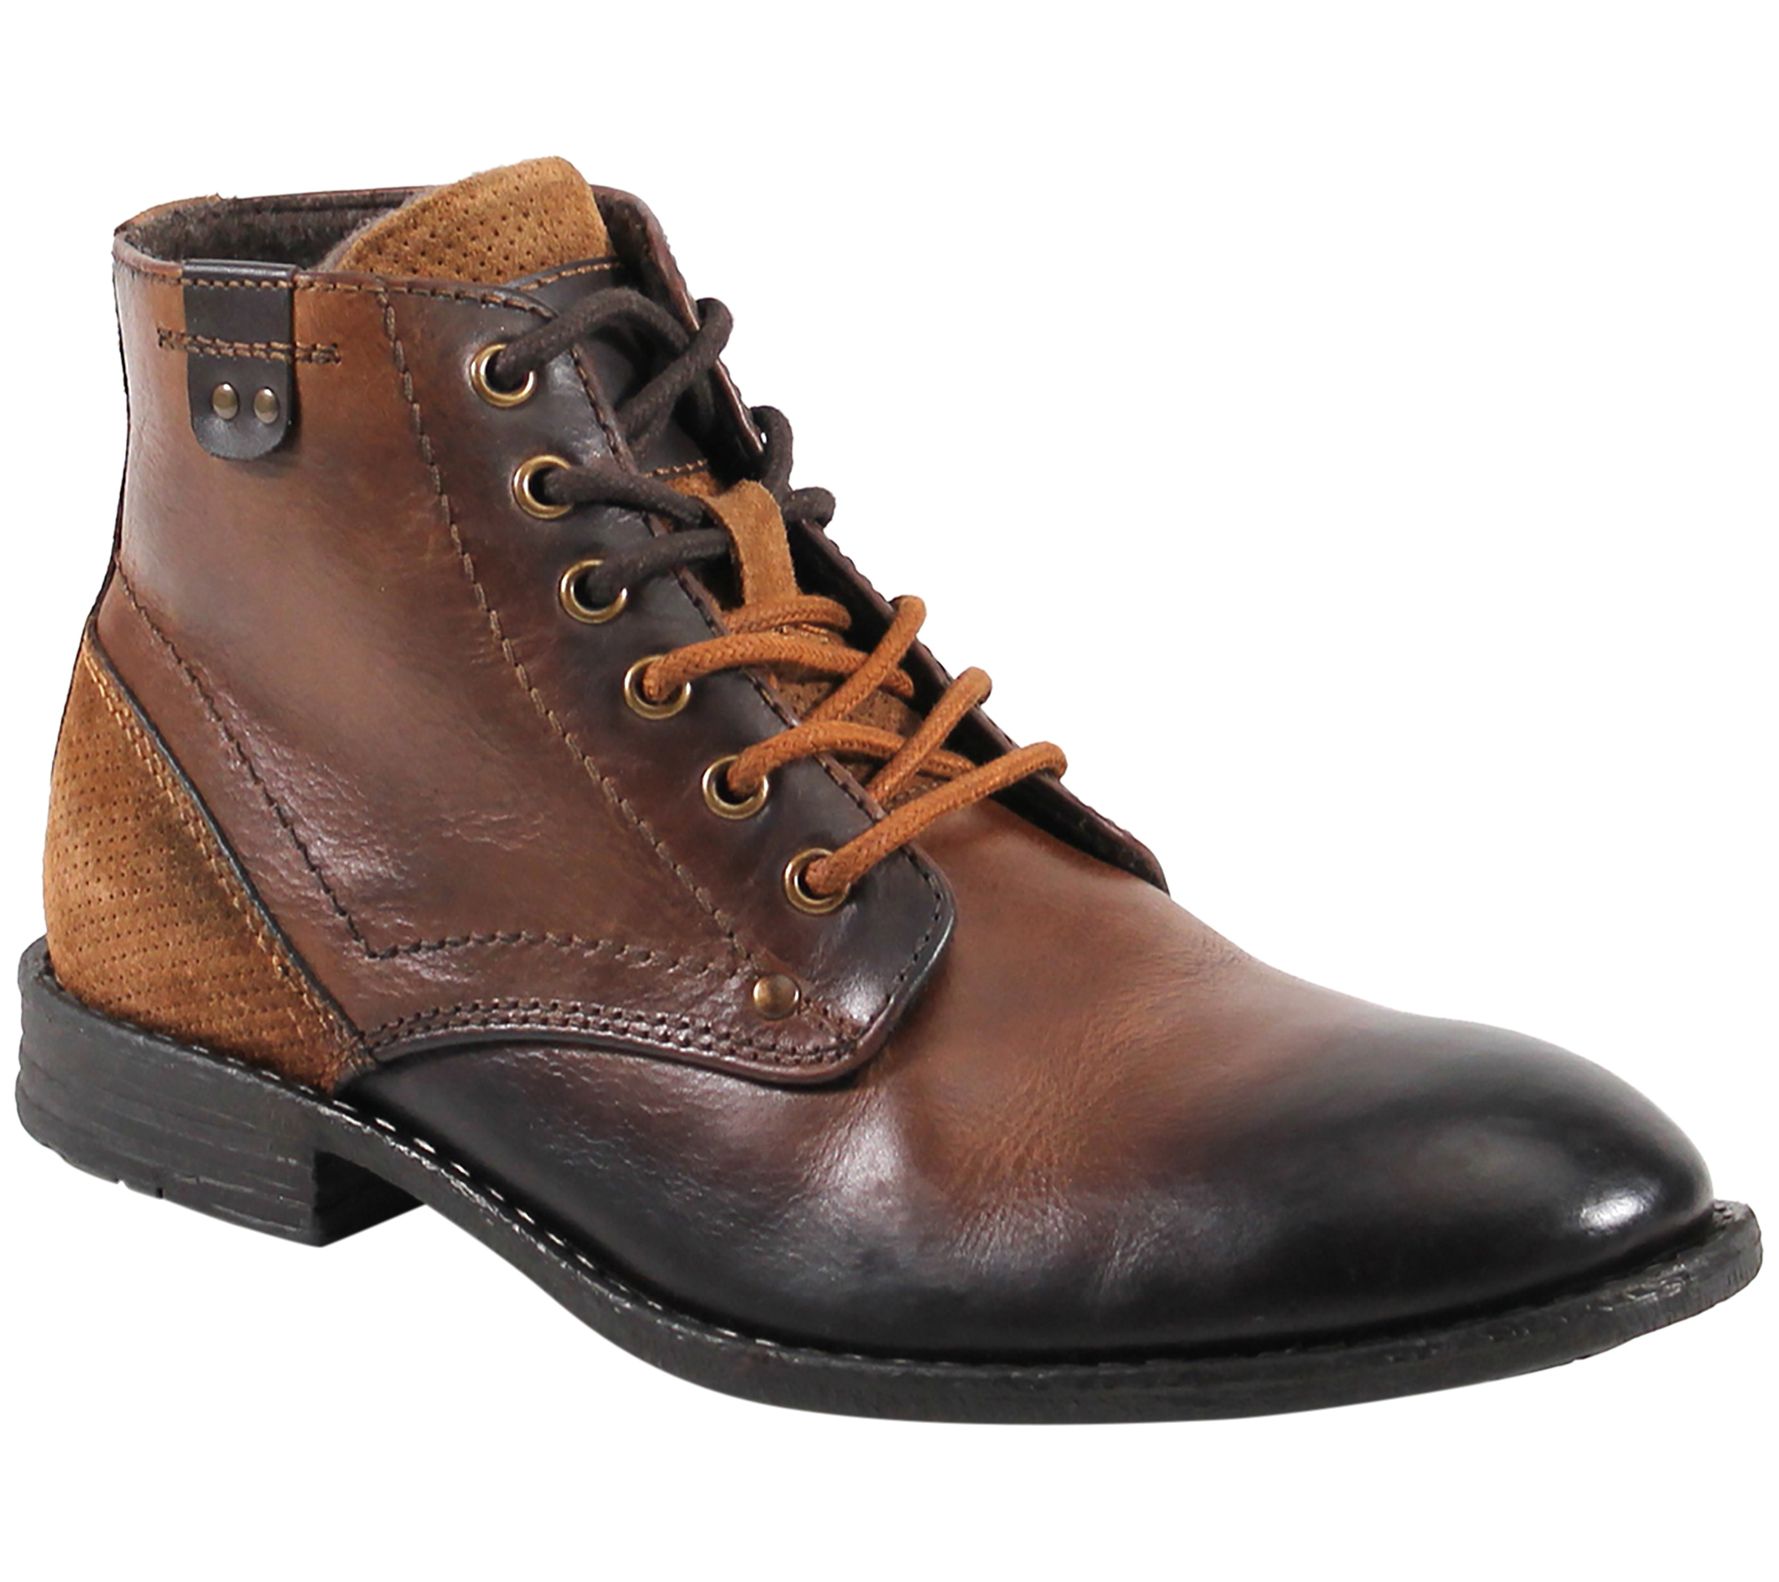 Testosterone Shoes Men's Leather Lace-Up Boots- Fight Song - QVC.com